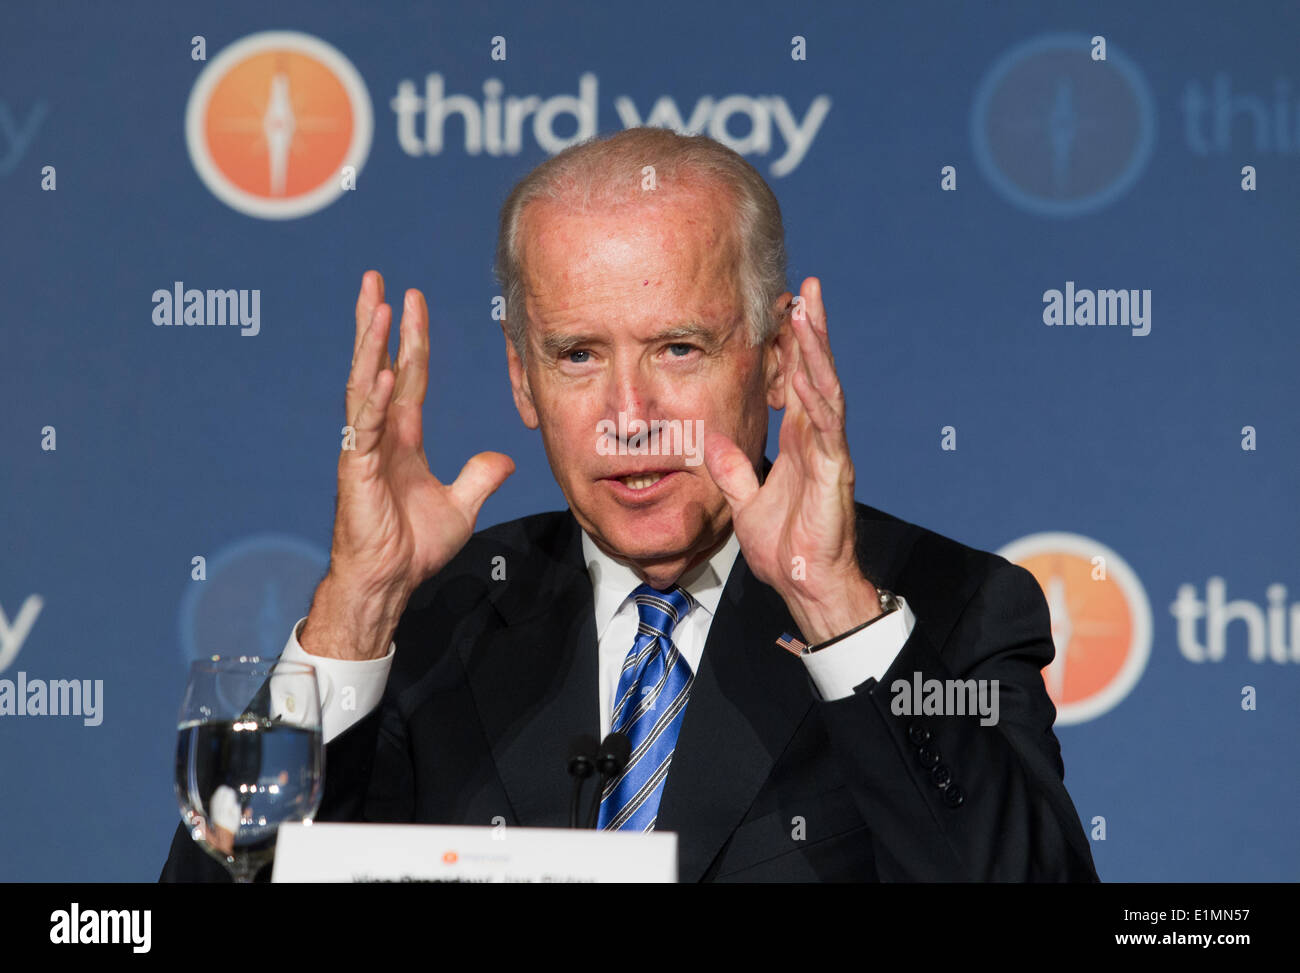 US Vice President Joe Biden makes a point during roundtable discussion on the future of workforce development at the Third Way conference the Ronald Reagan Building June 4, 2014 in Washington, DC. Stock Photo